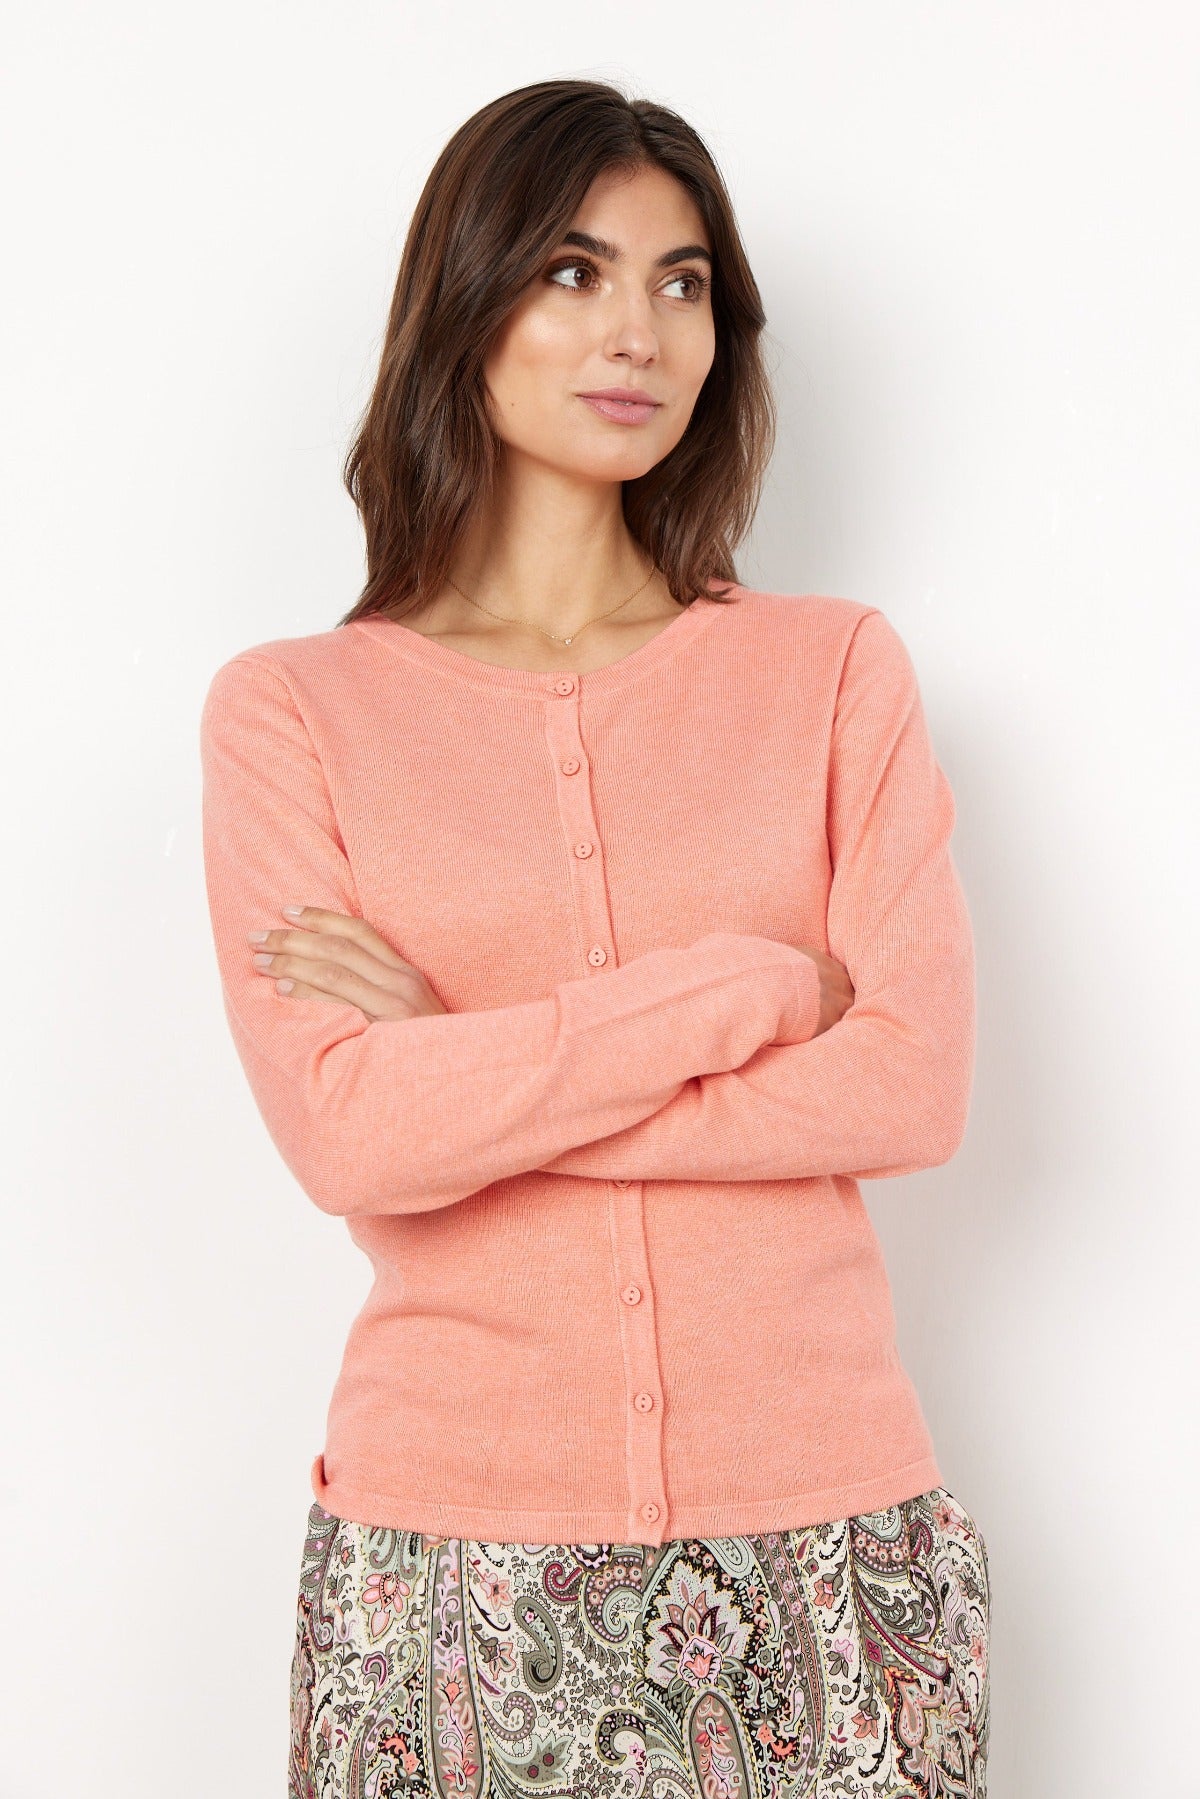 The Dolora Cardigan in Coral